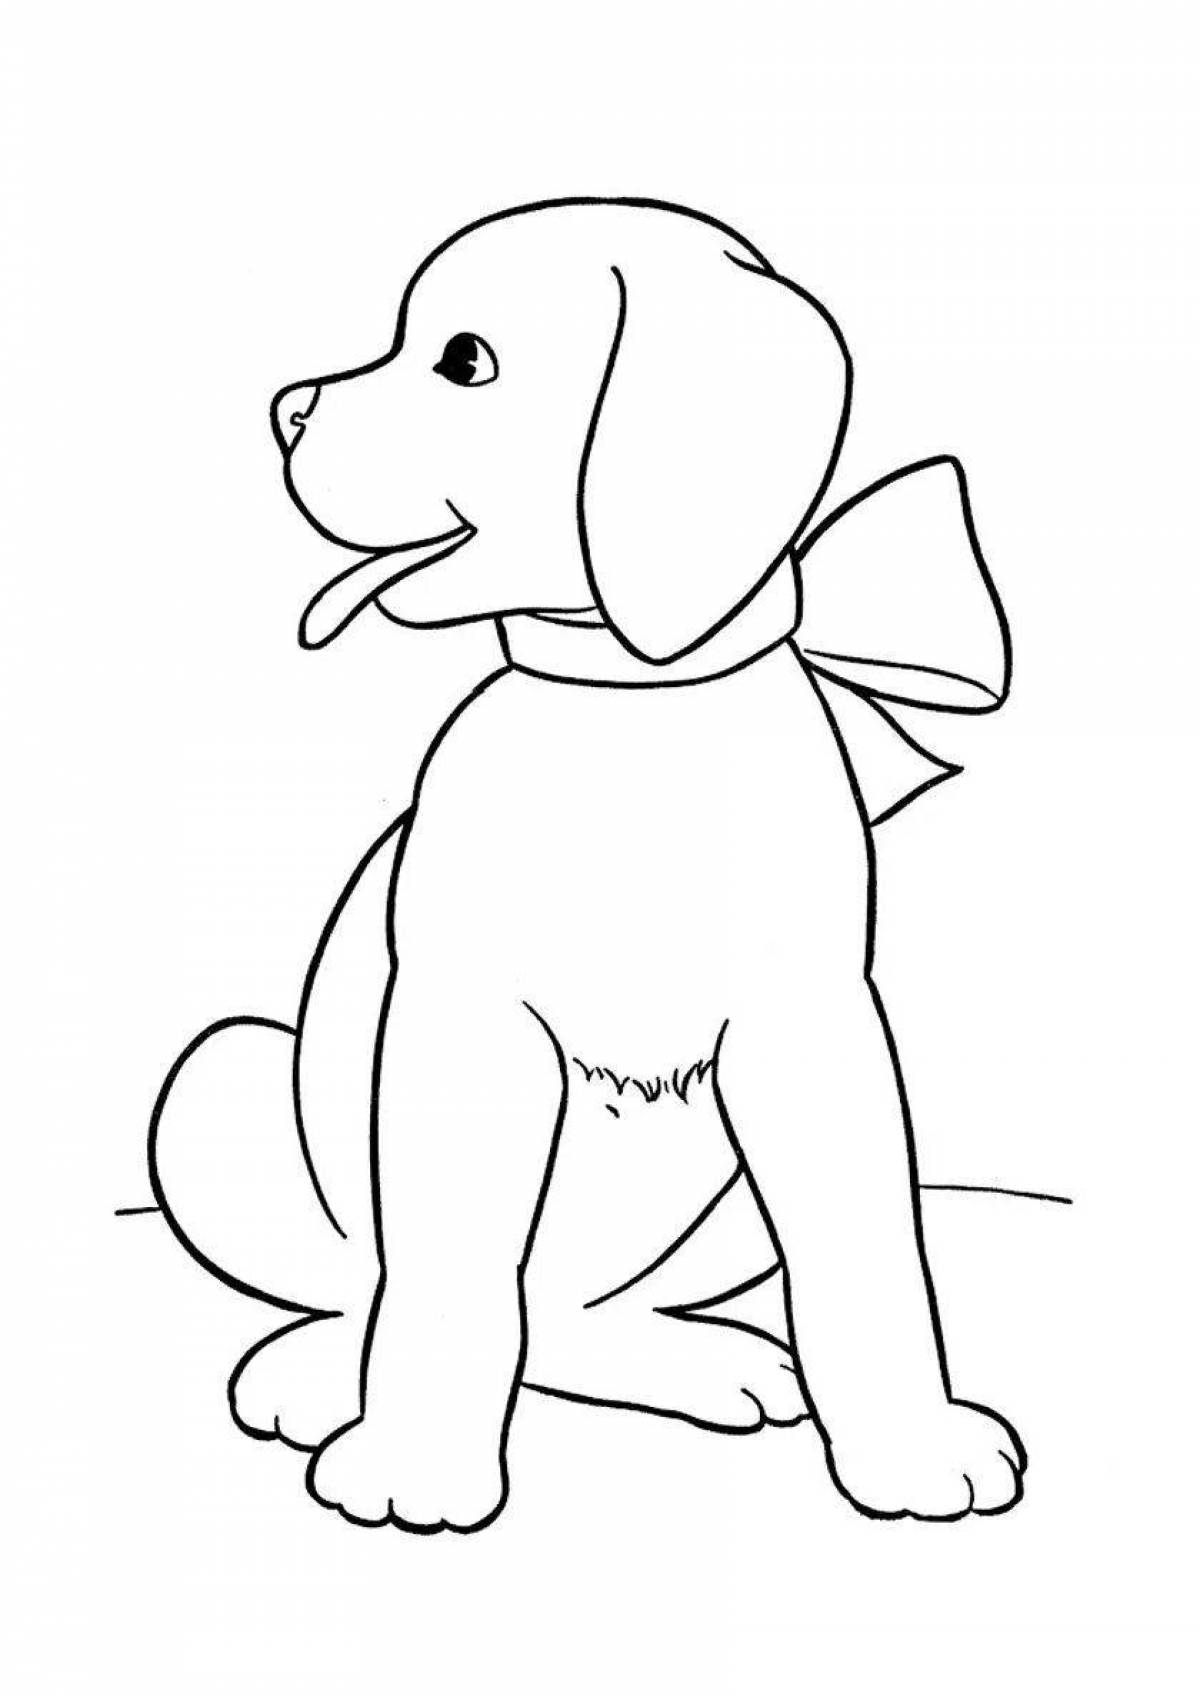 Coloring page excited puppy